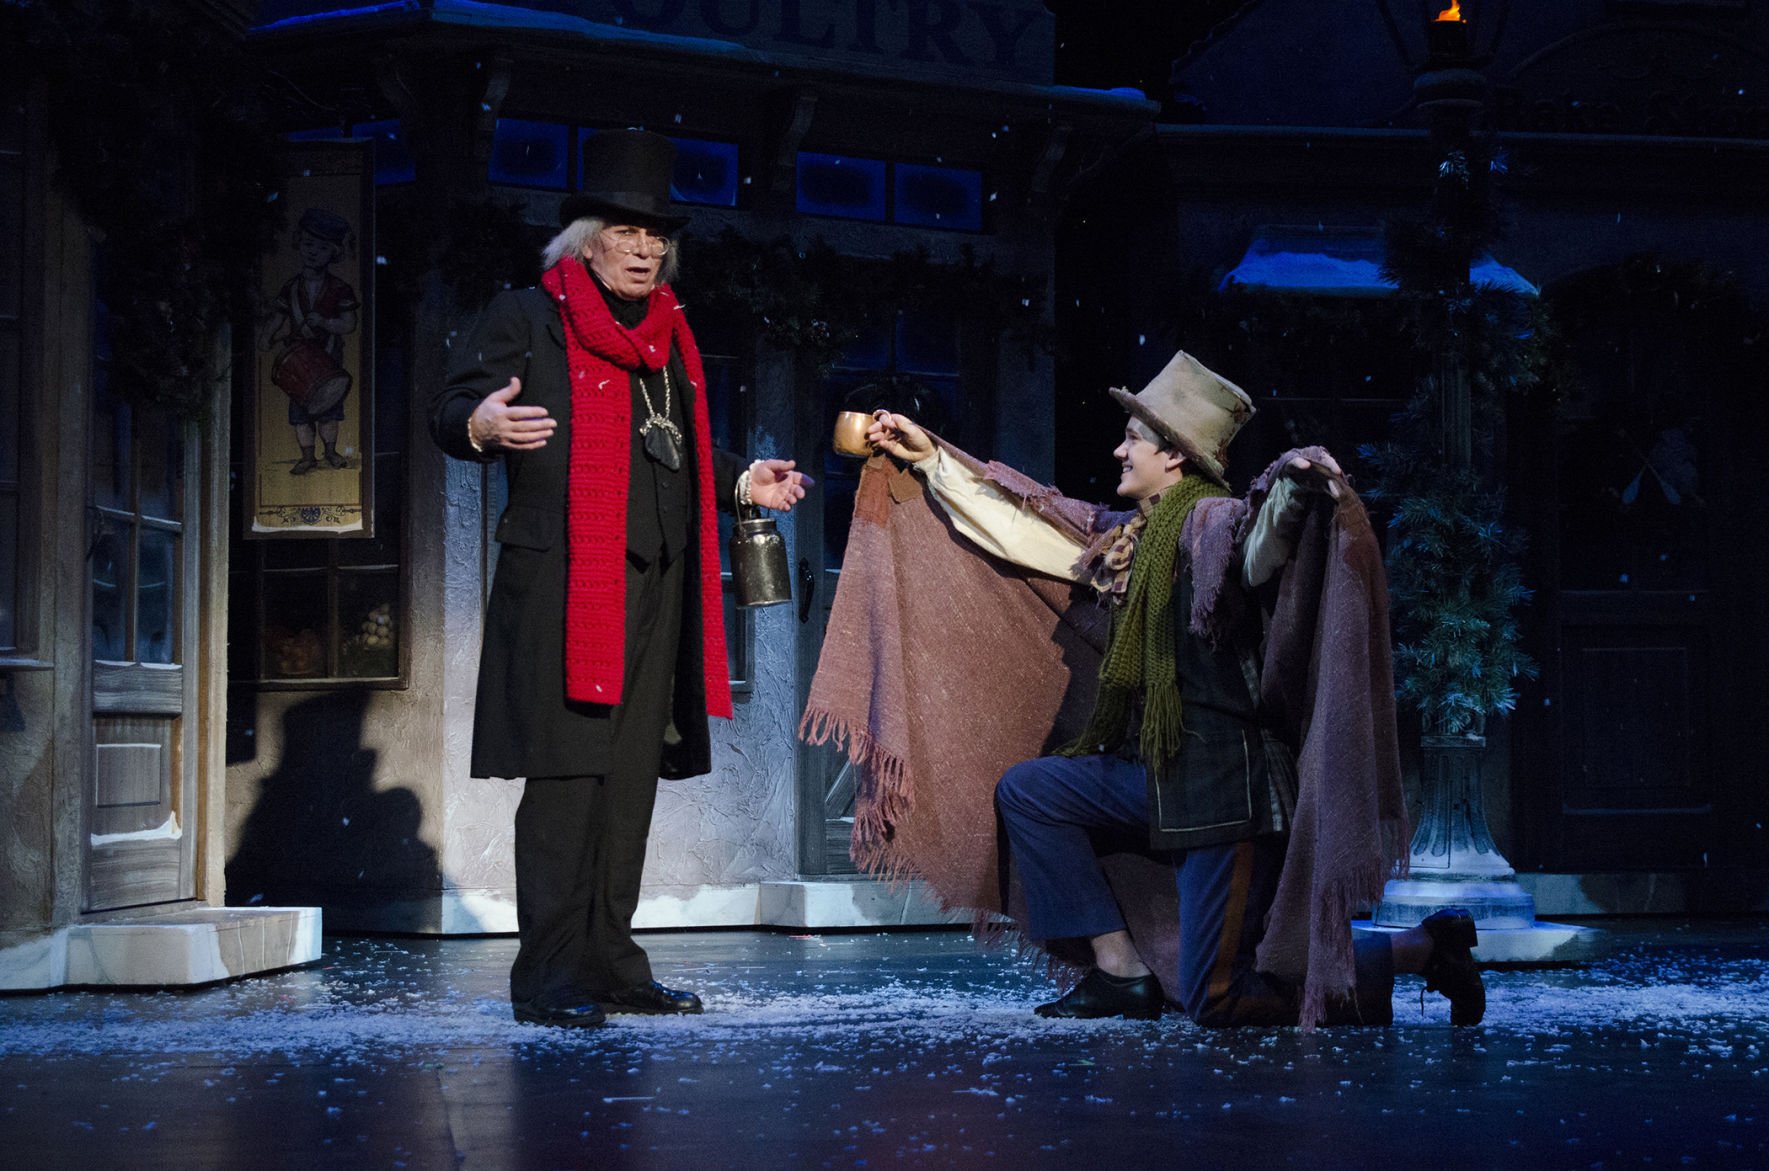 Marley, is that you again? 'A Christmas Carol' returns to the Fox